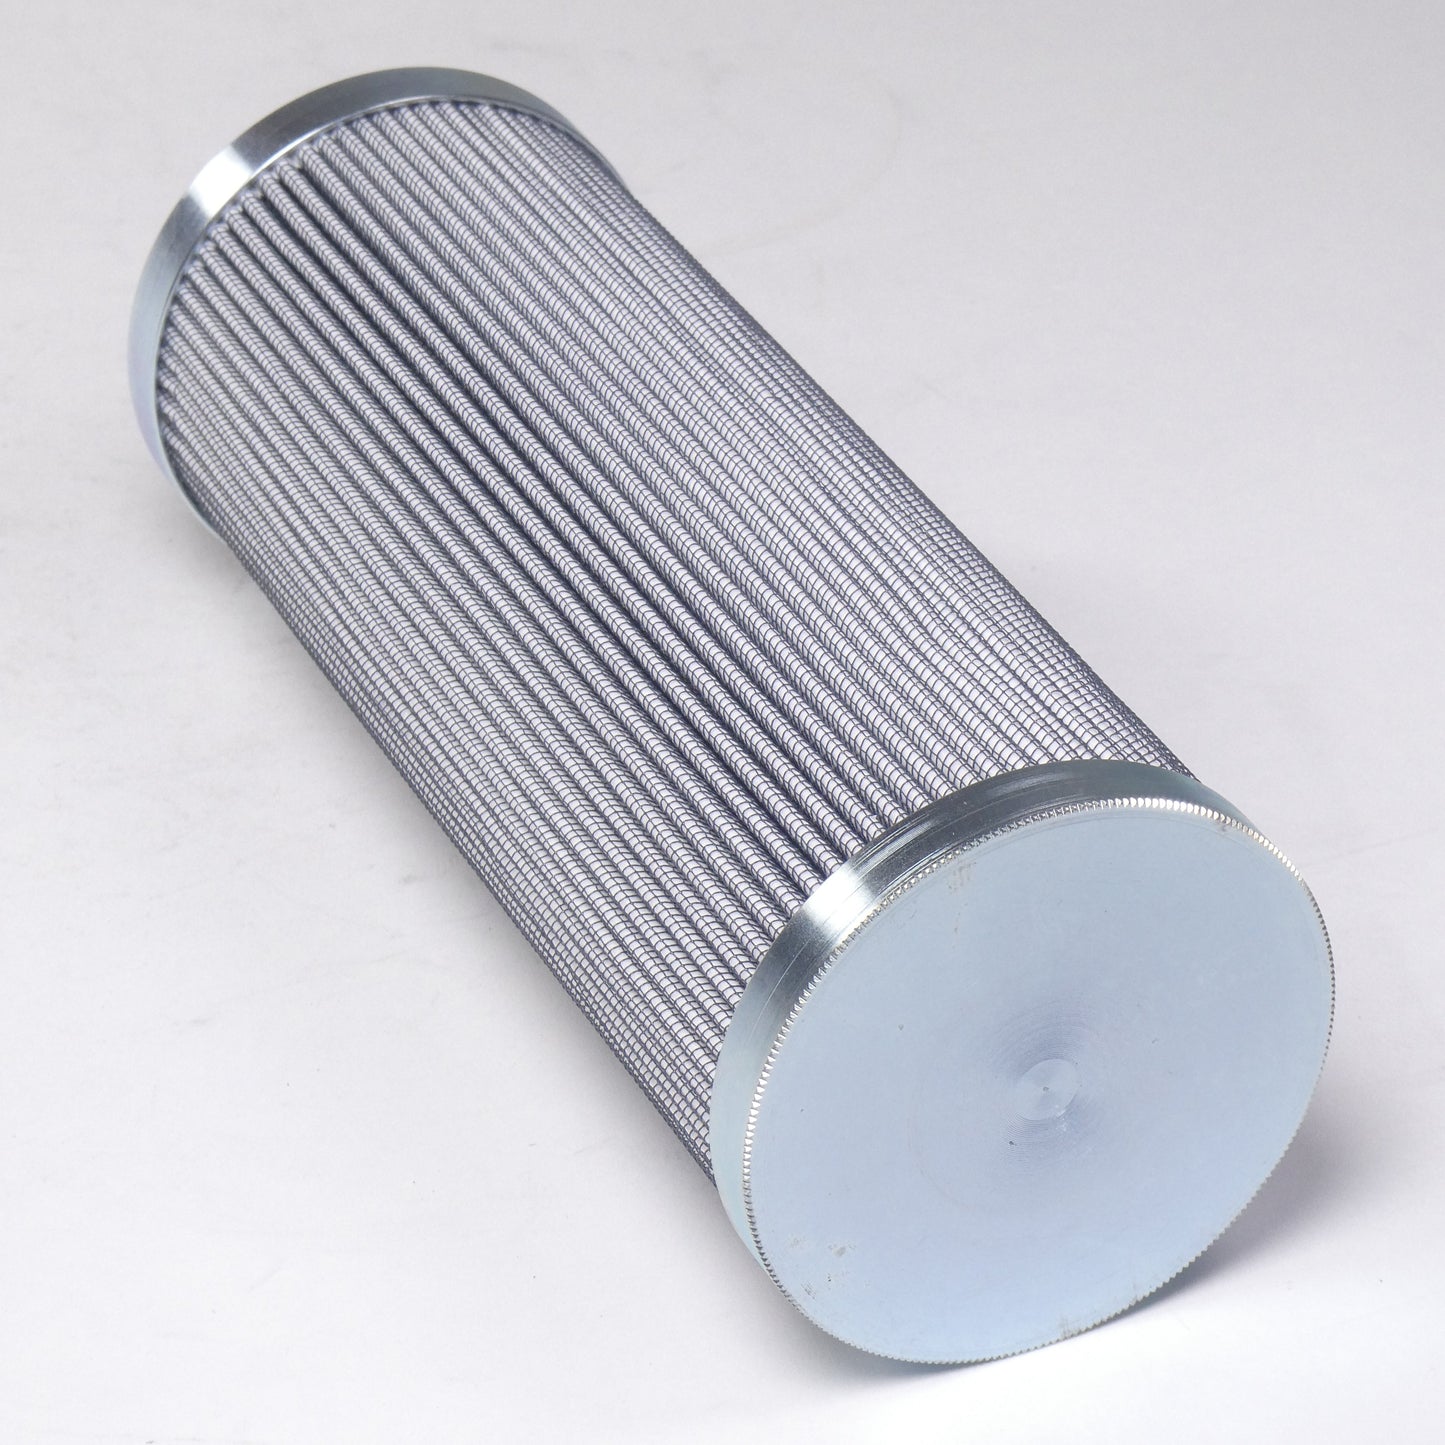 Hydrafil Replacement Filter Element for Pall HC9601FCP8Z